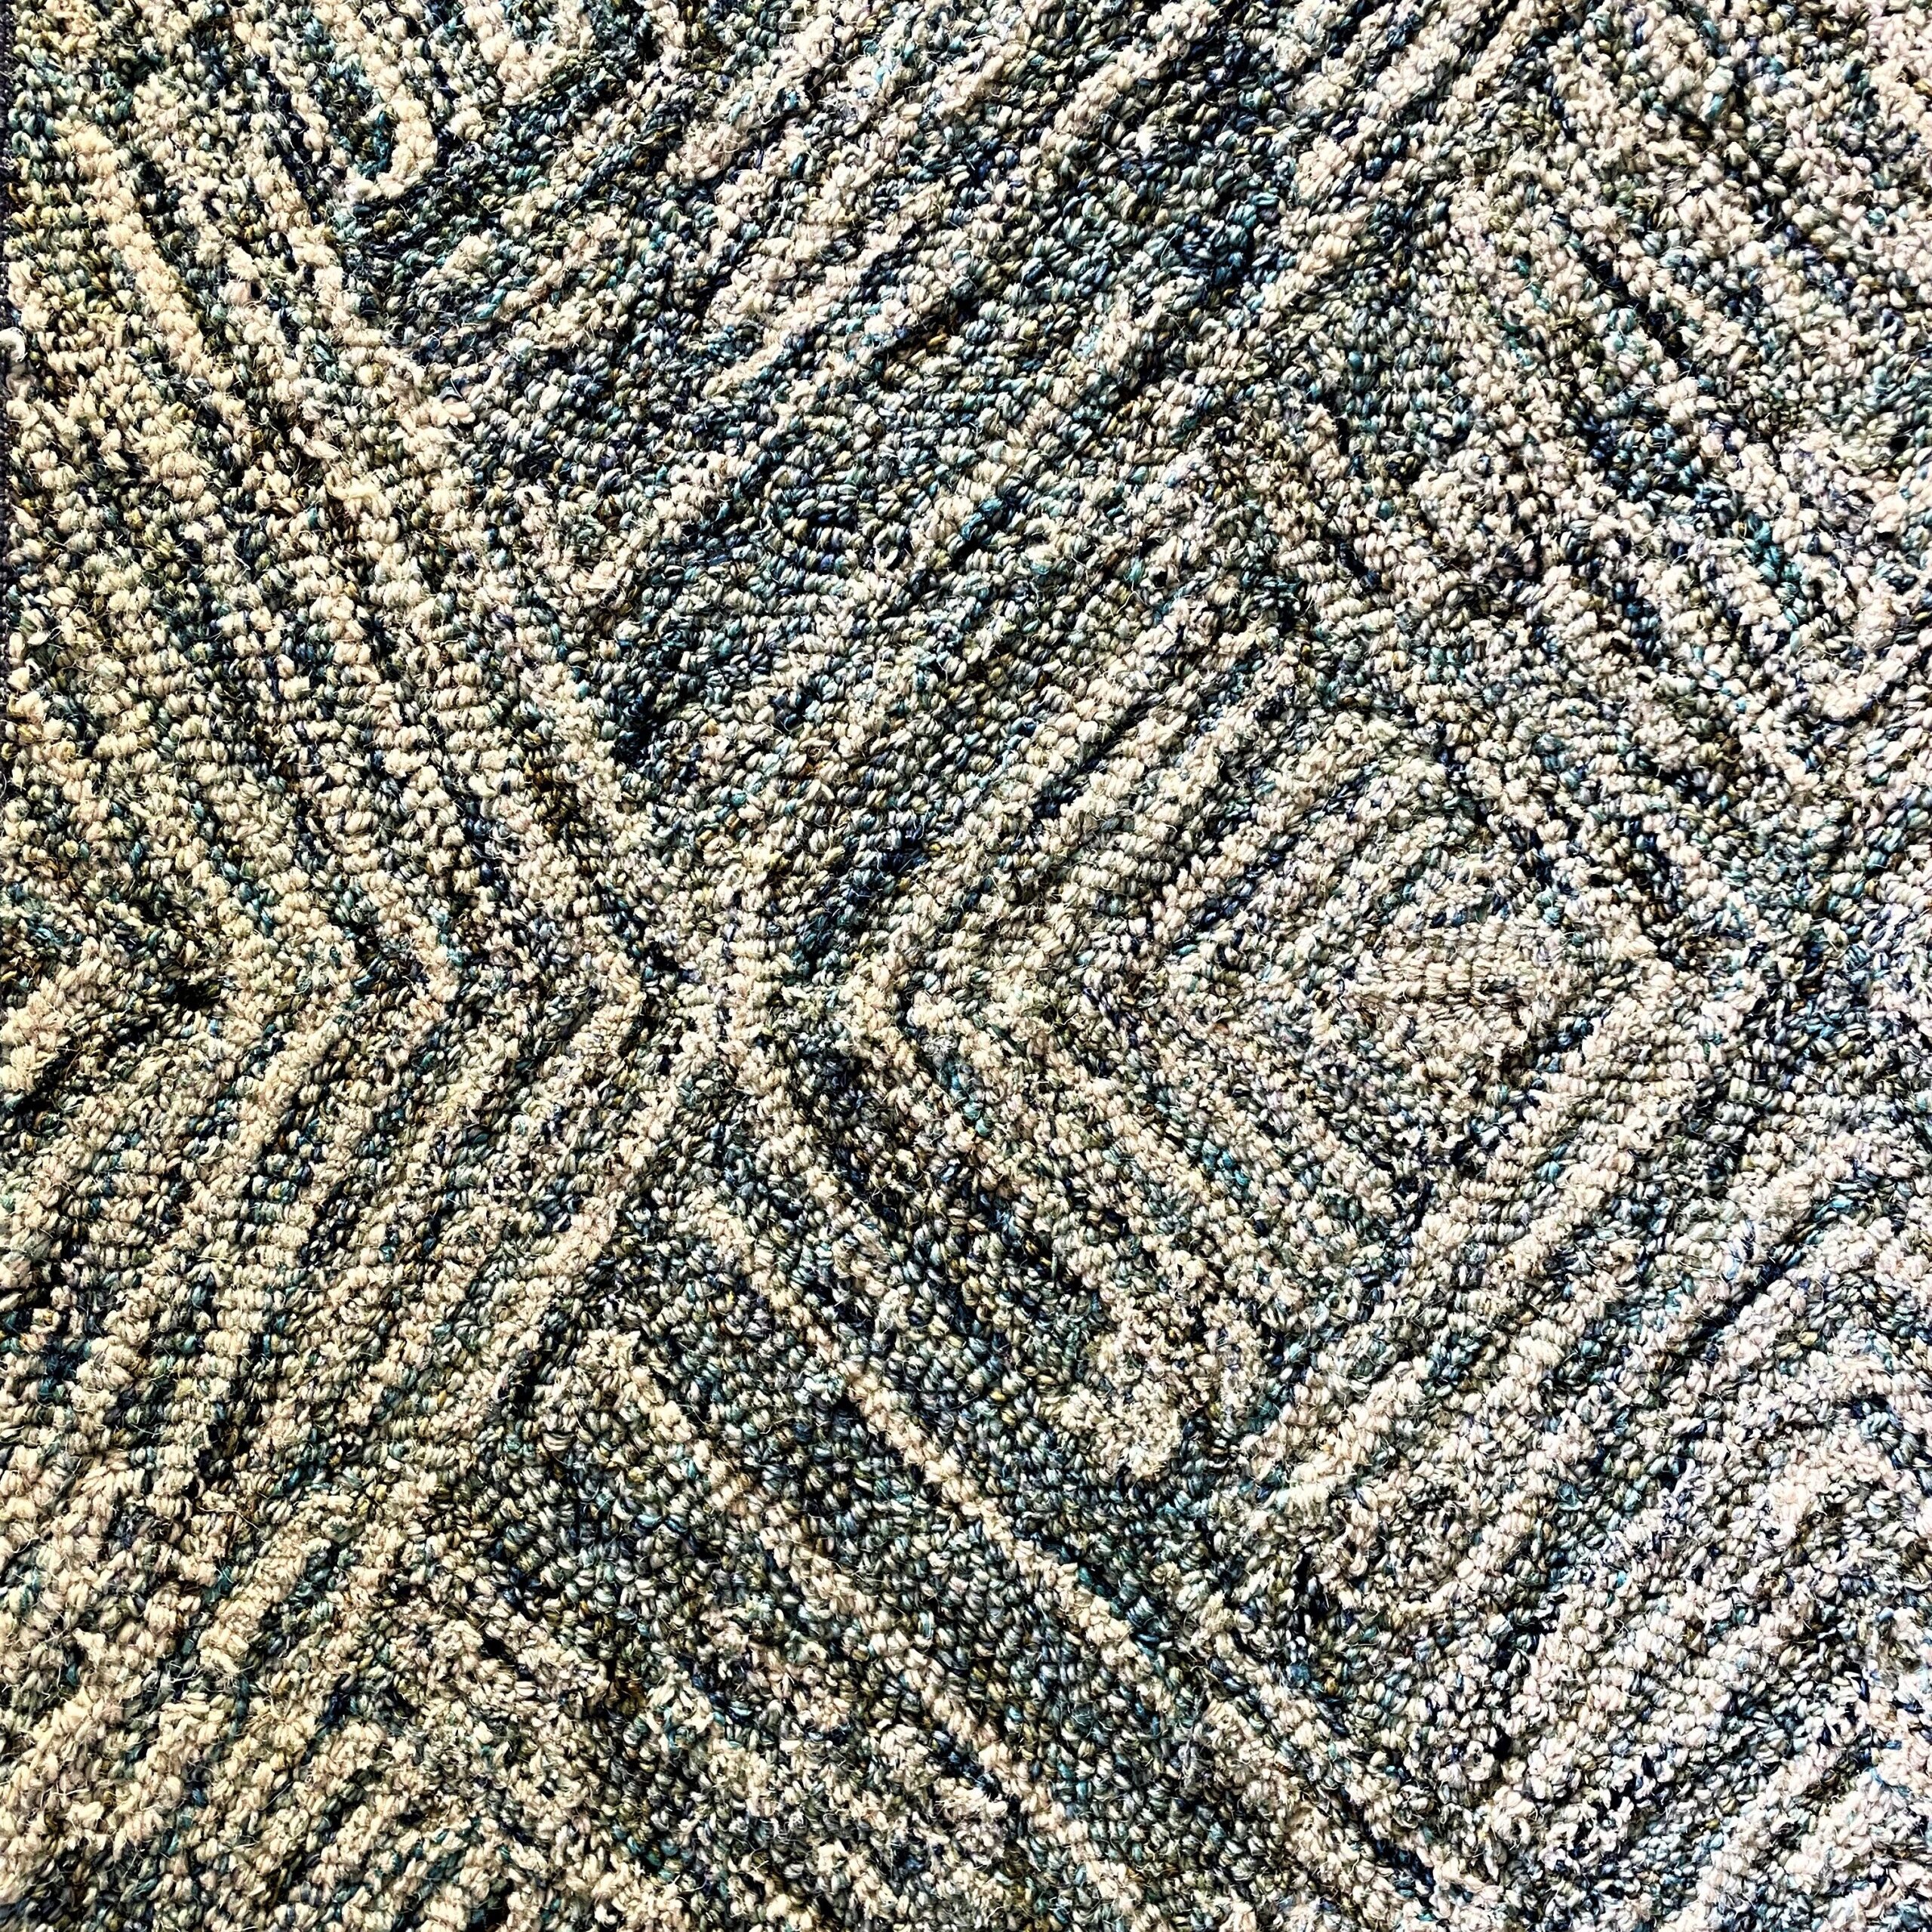 Multi-colored carpet with raised pattern